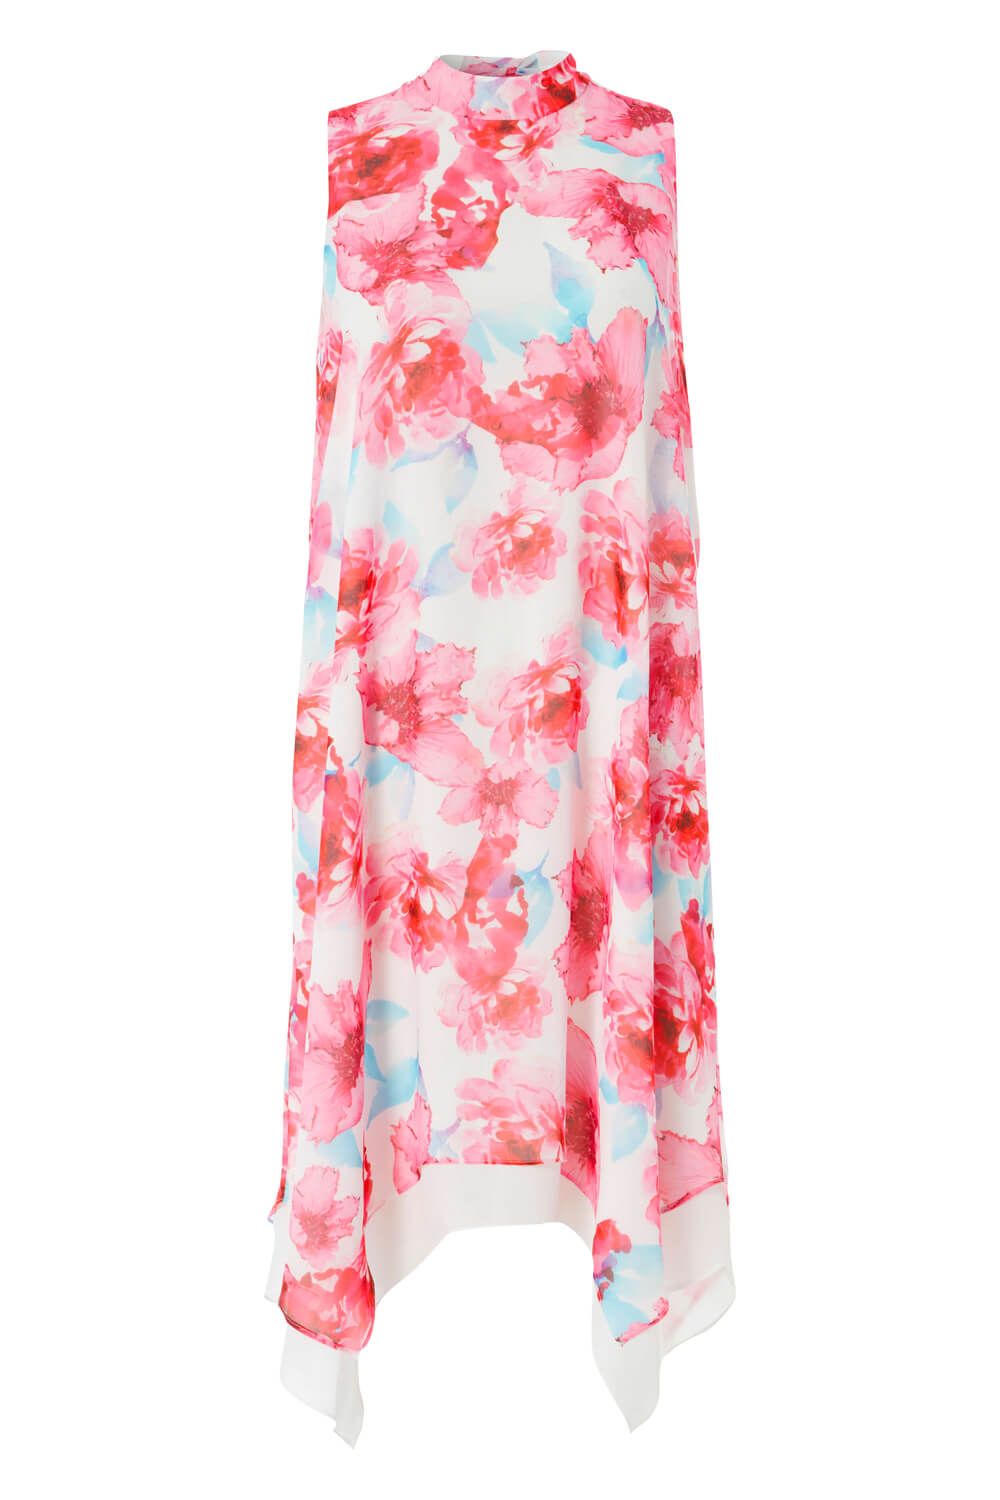 PINK High Neck Floral Print Swing Dress, Image 5 of 5